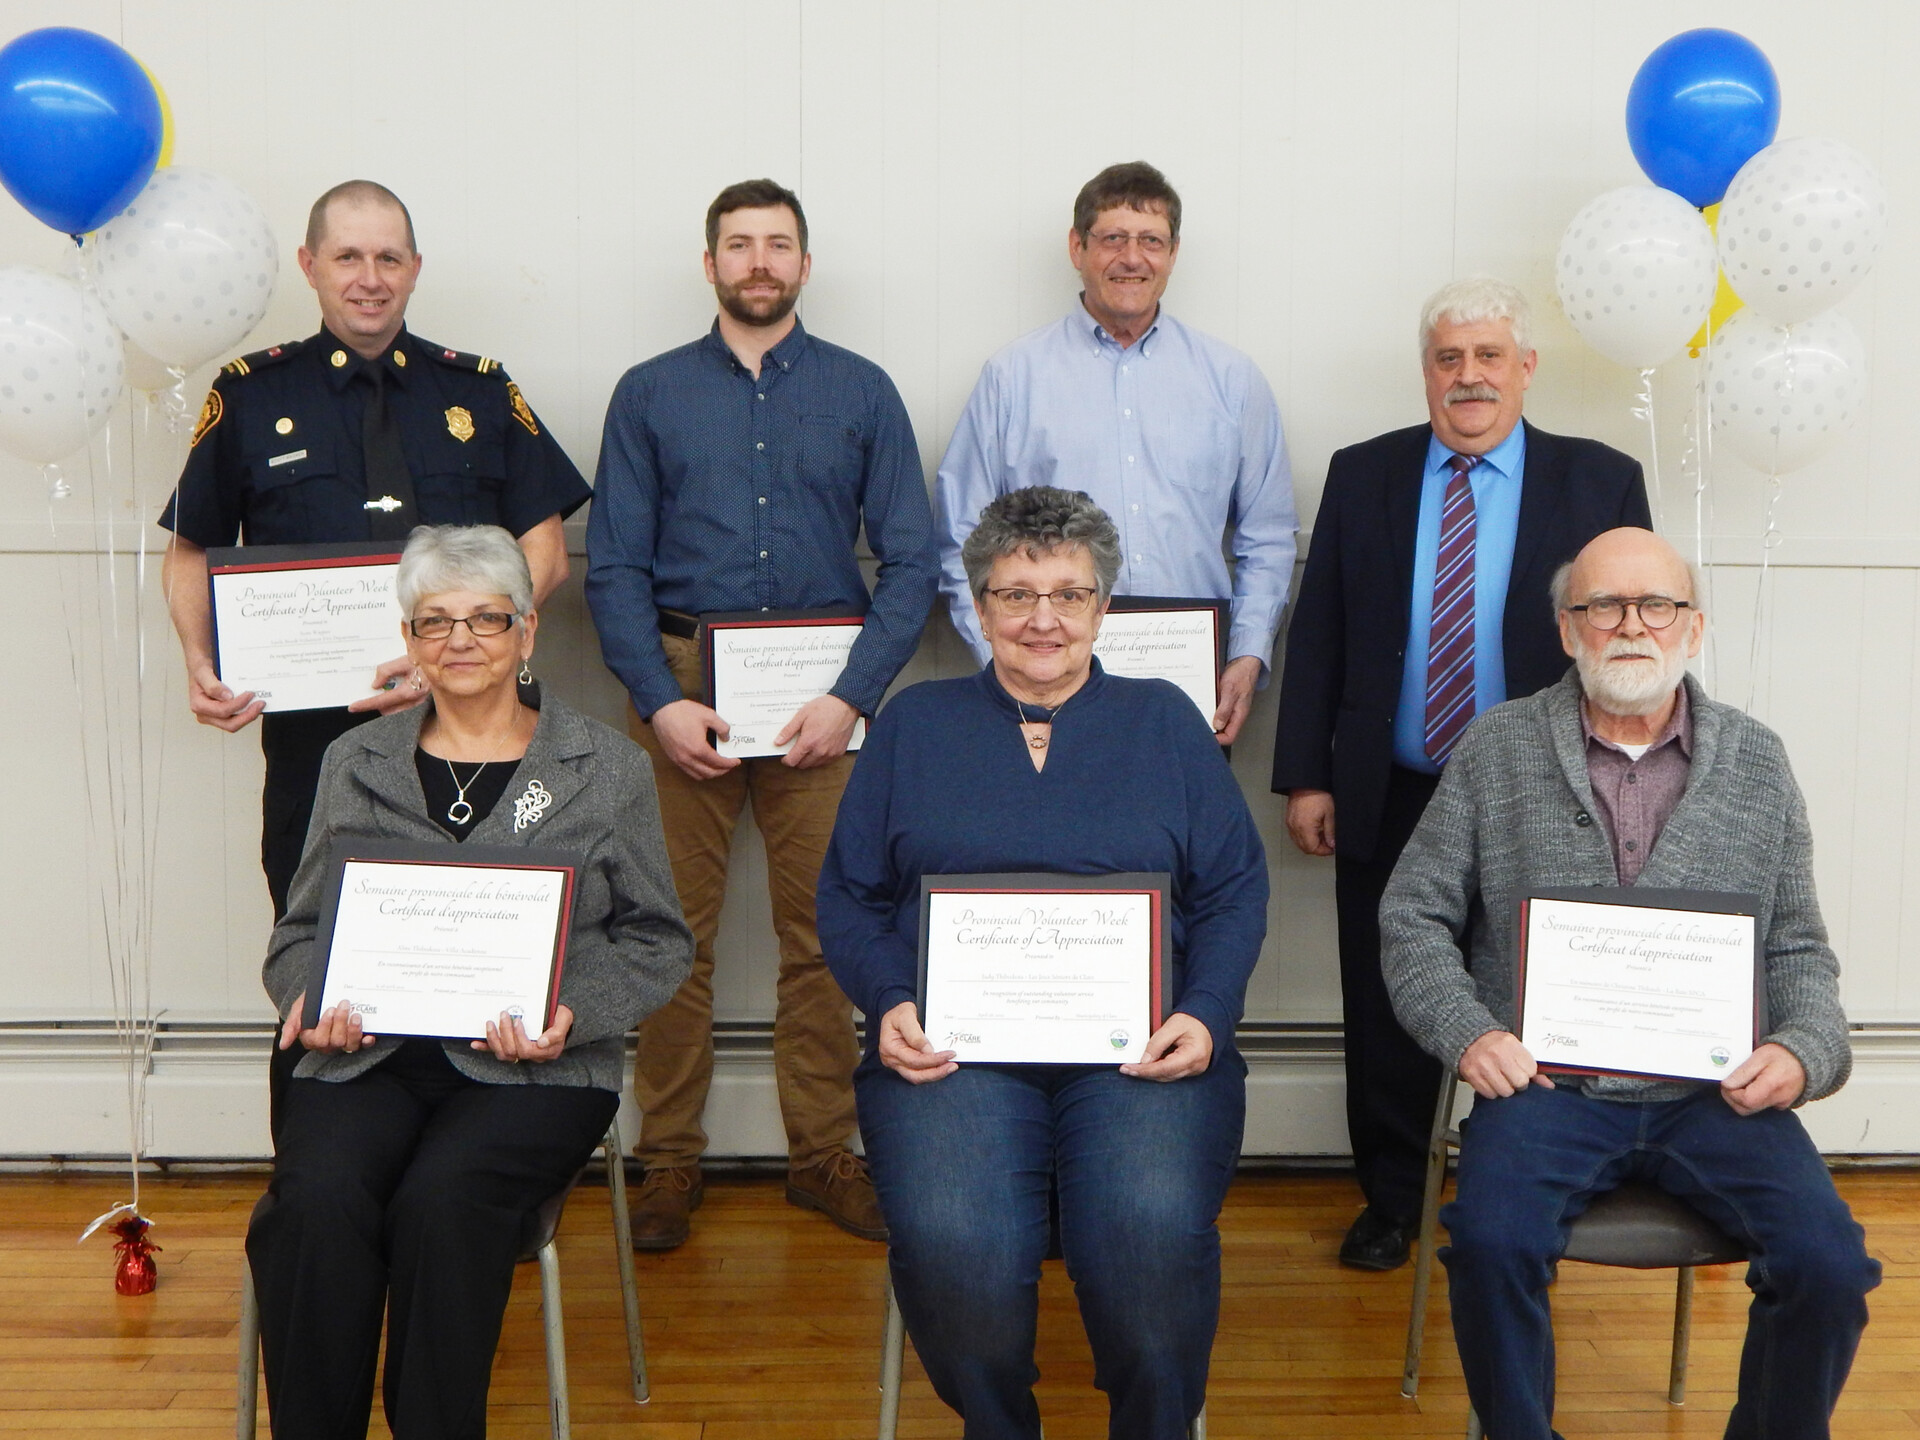 Clare Volunteer Award recipients for 2022 Back row, left to right: Scott Wagner, Jacques Robicheau (on behalf of Denise Robicheau), Richard Robicheau and Deputy Warden Eric Pothier Front row, left to right: Aline Thibodeau, Judy Thibodeau and Paul-Émile Comeau (on behalf of Christine Thibault) Absent: Gerard Pothier, Réanne Titus and Christine Tufts-O’Meara 